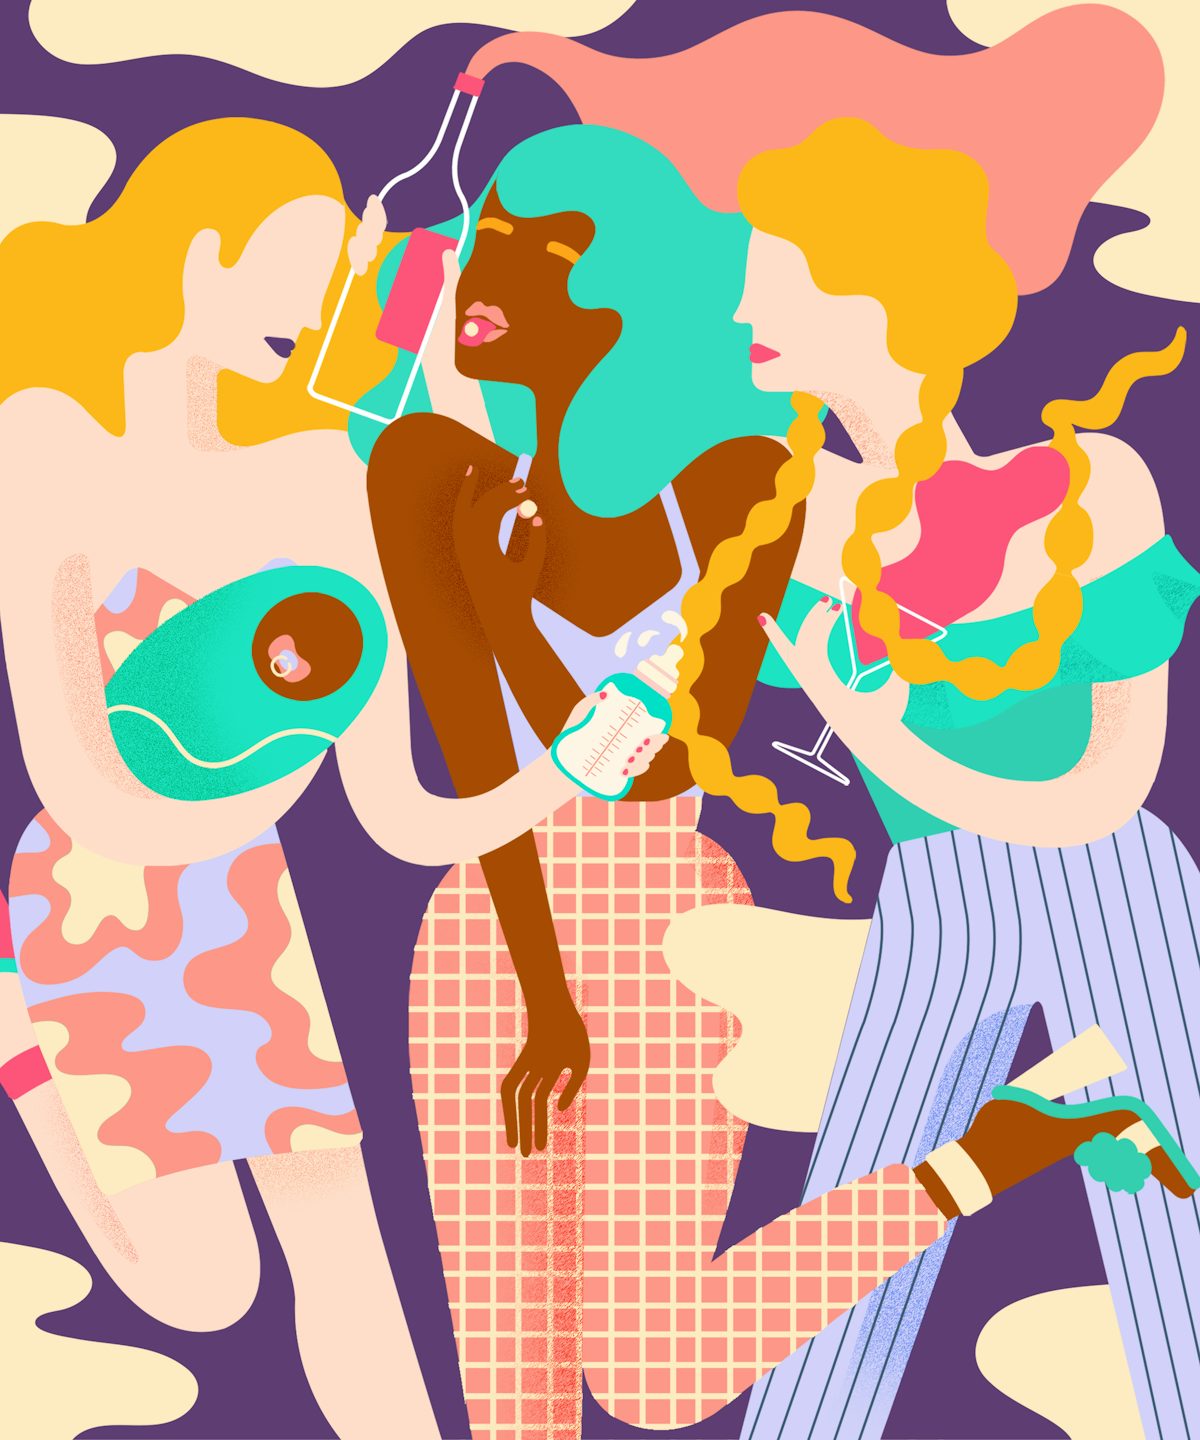 Illustration for Refinery29 UK, for an article about 'Rave Mums' and new parents who still take drugs recreationally 